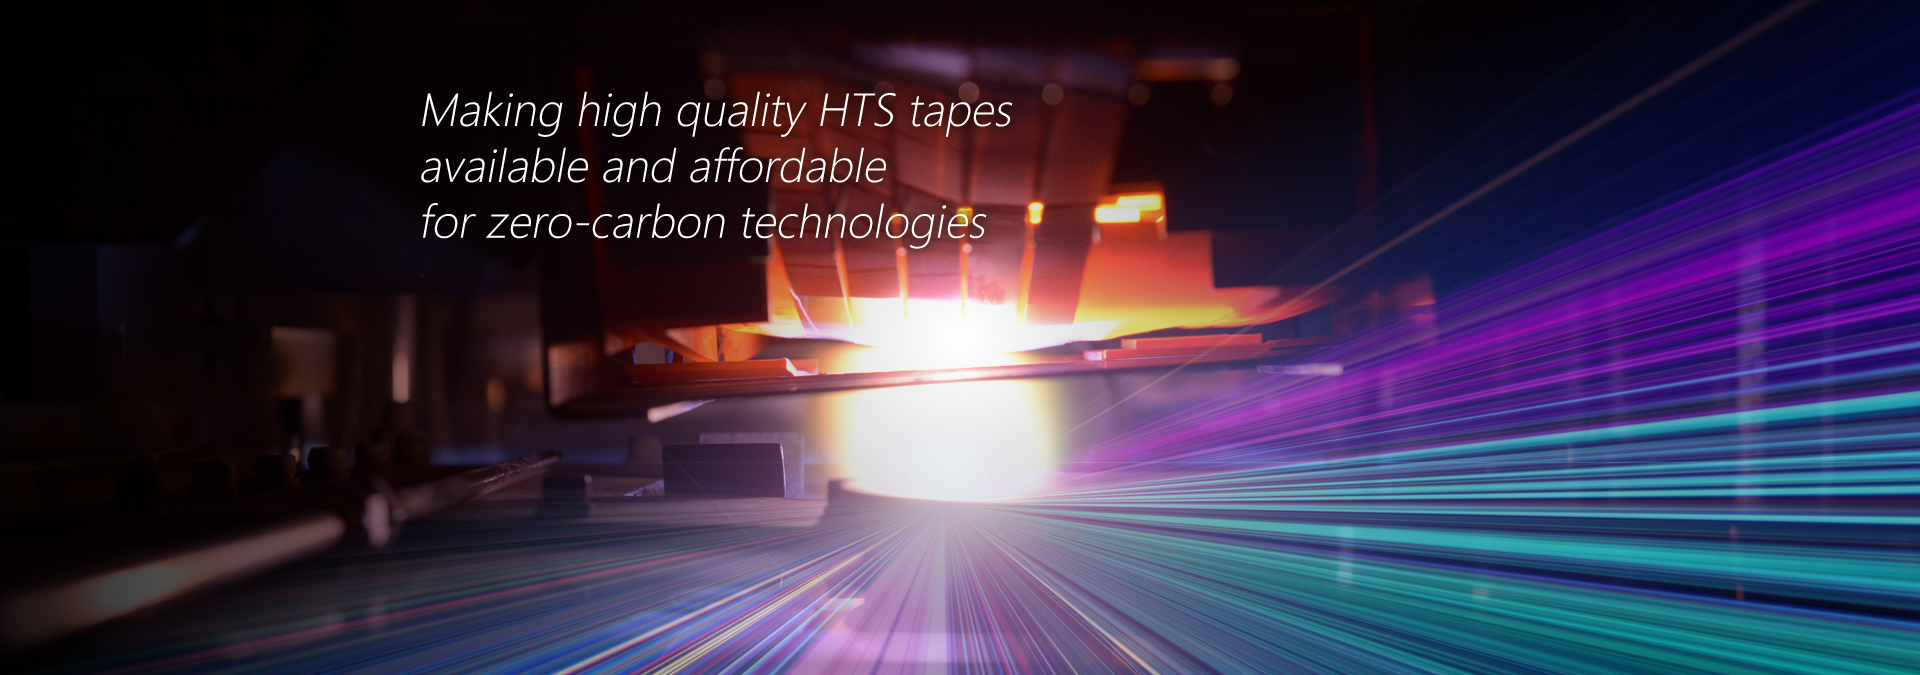 Making high quality HTS tapes available and affordable for zero-carbon technologies